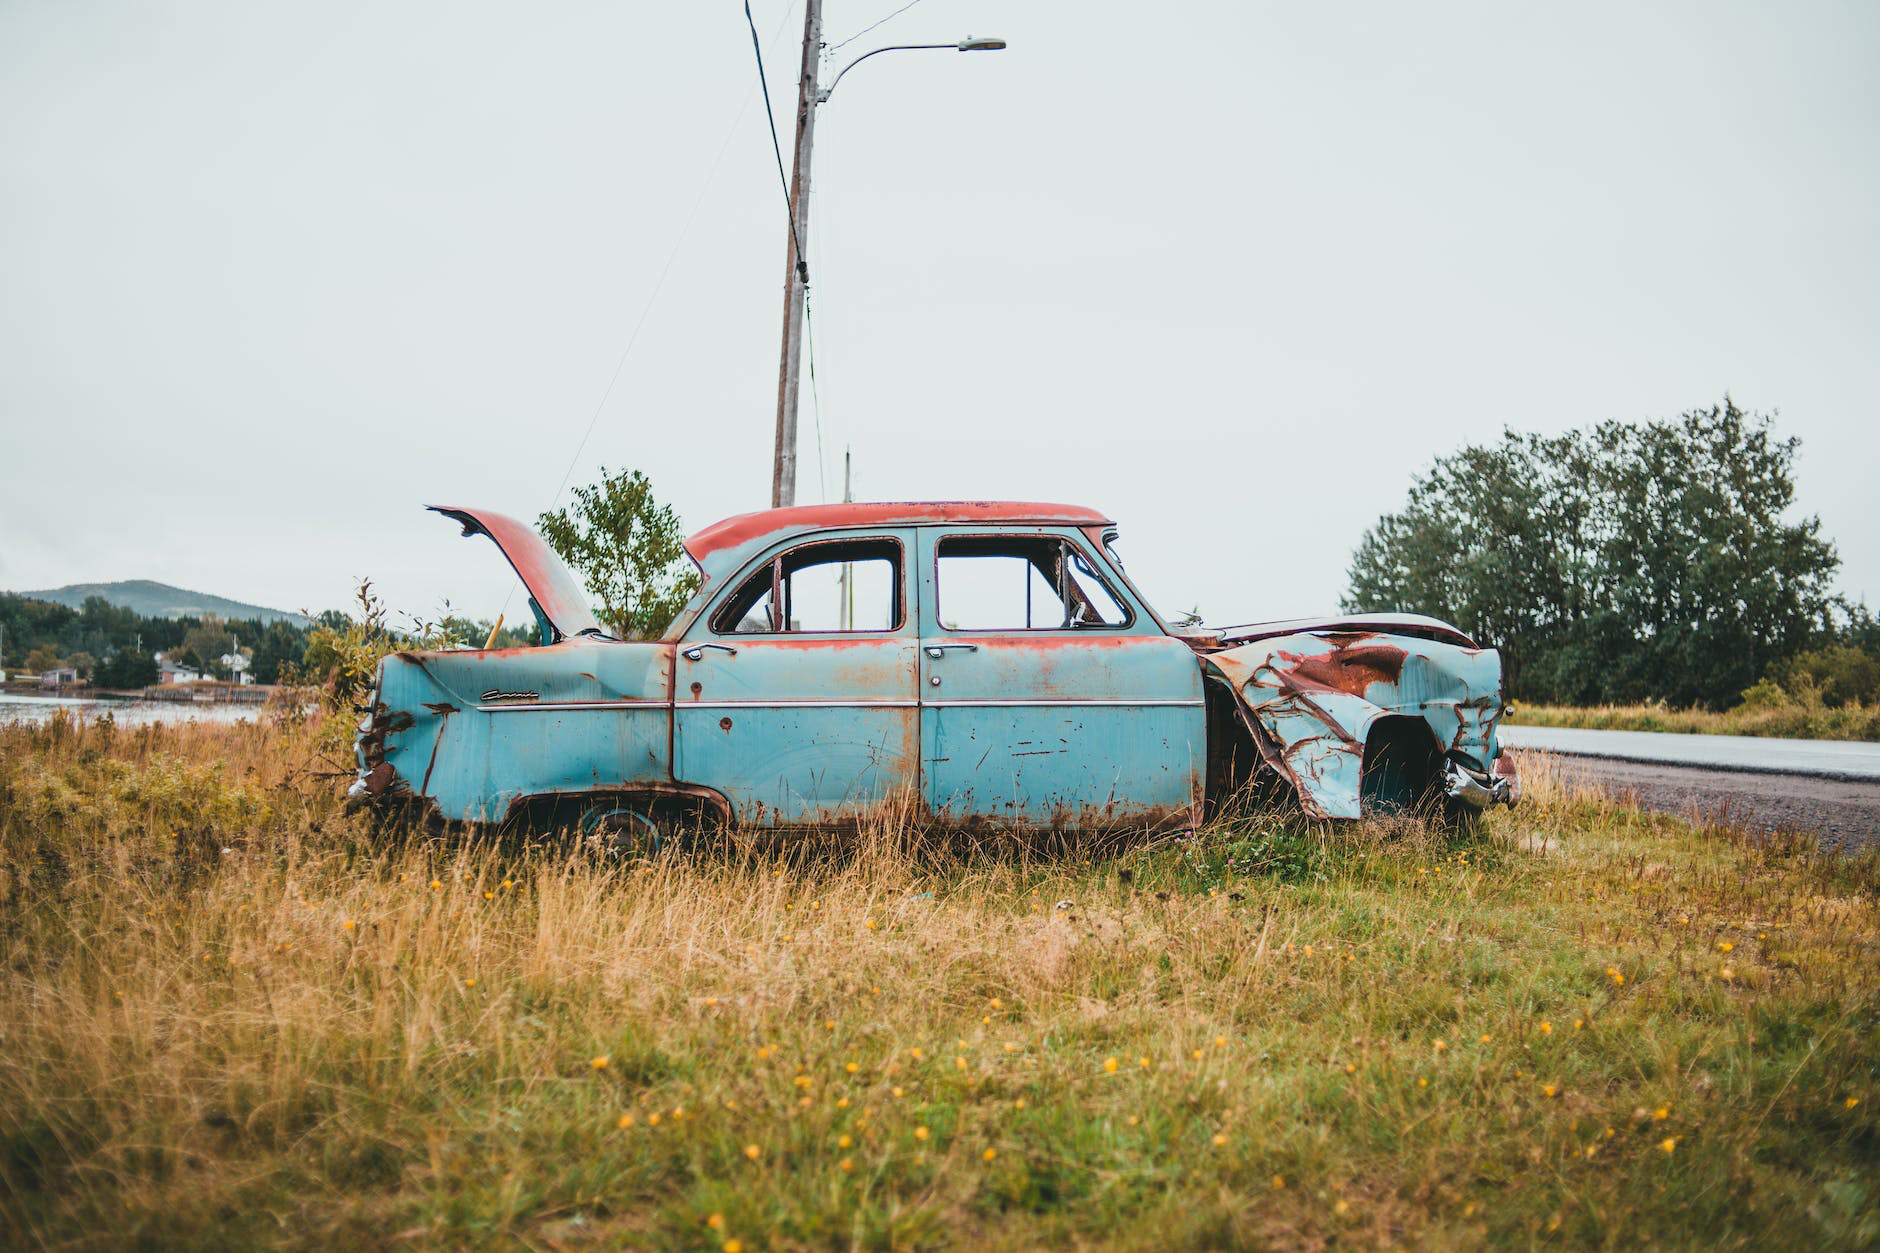 An old rusted car sits on the side of the road.